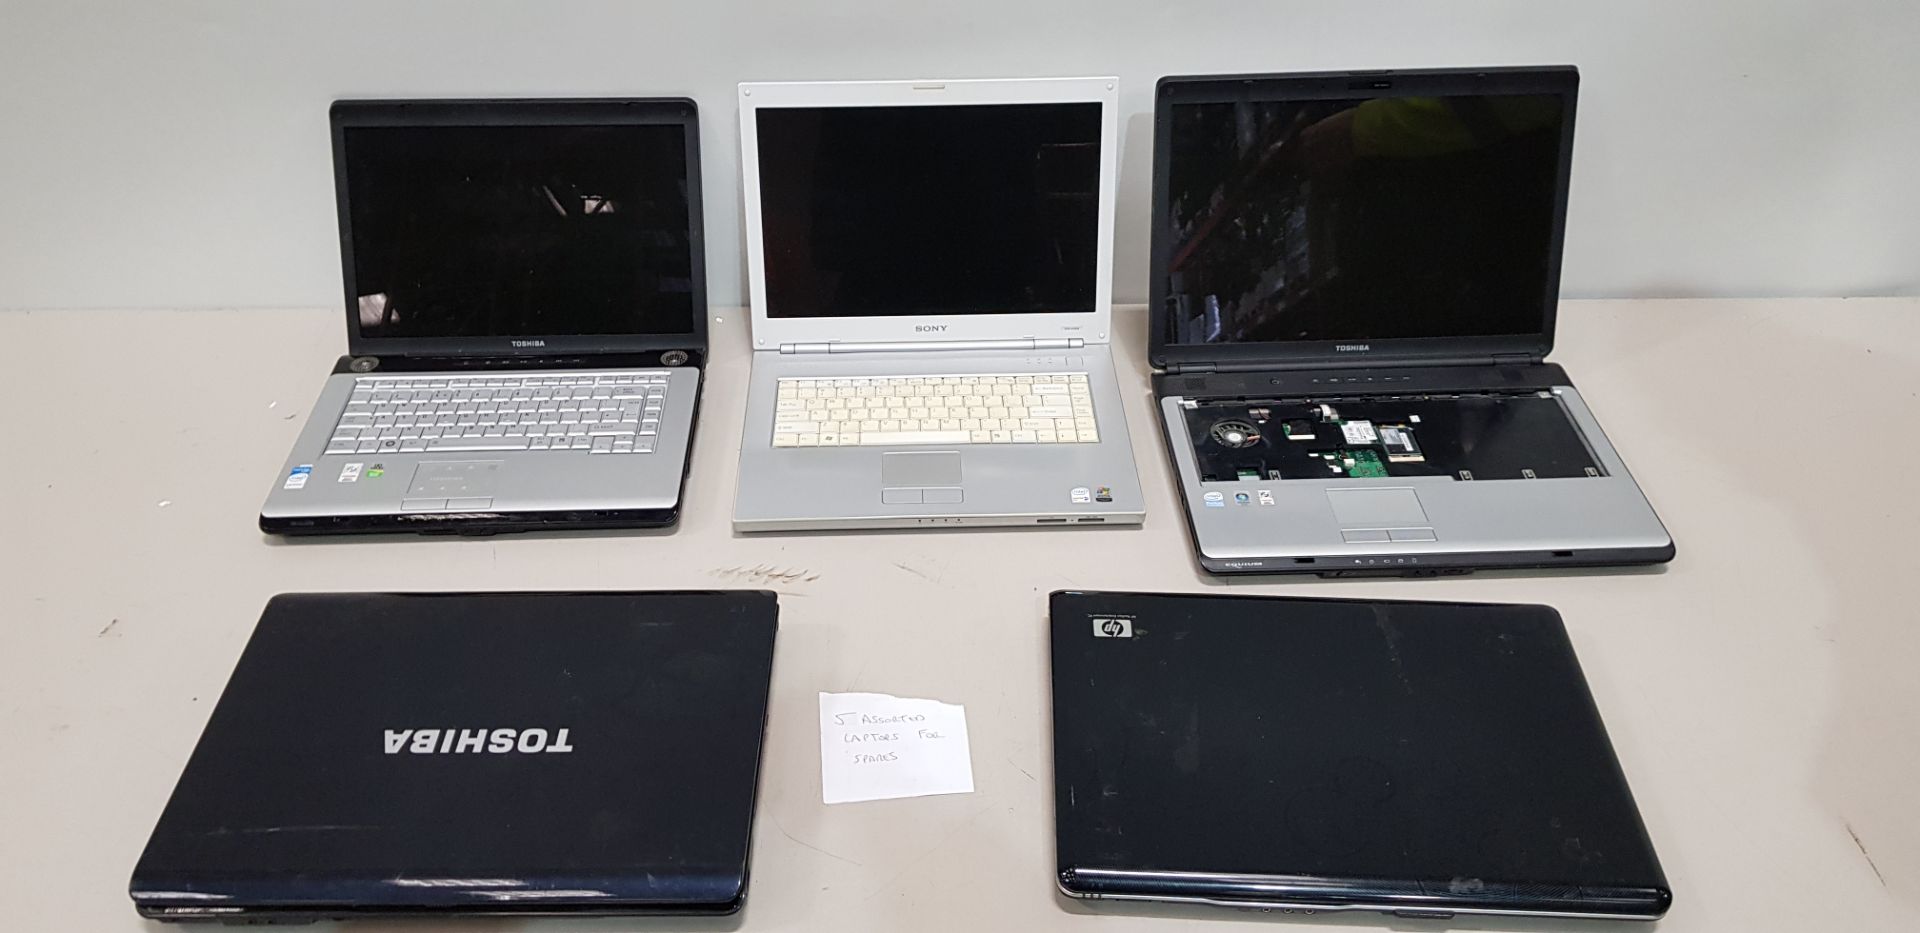 5 X ASSORTED LAPTOPS FOR SPARES - TO INCLUDE TOSHIBA / HP / TOSHIBA / SONY / TOSHIBA